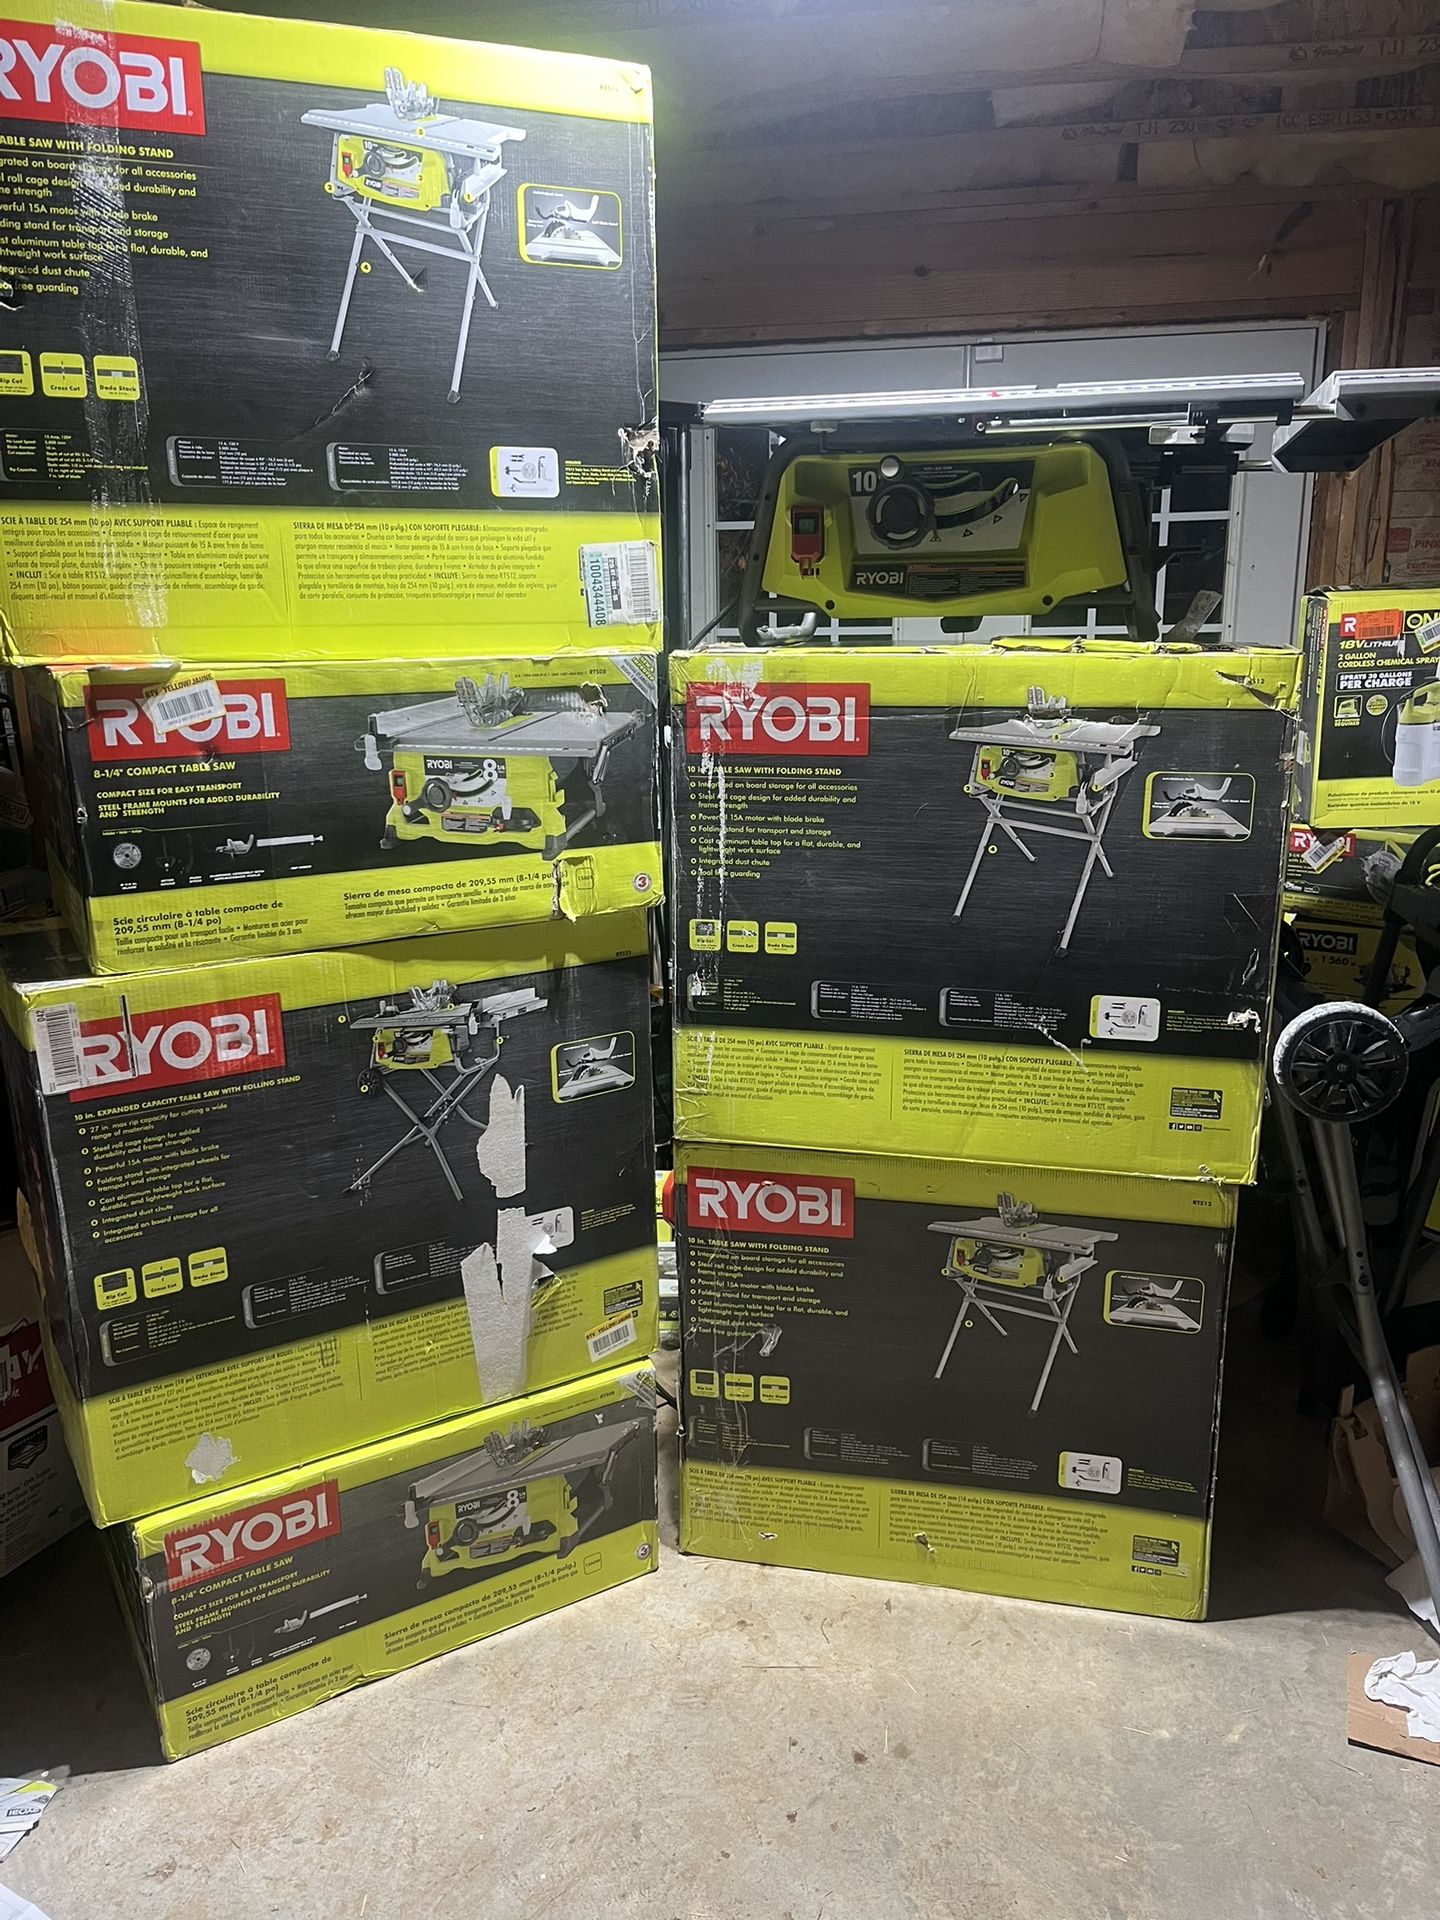 RYOBI TABLE SAW BLOWOUT SALE!!! 8 1/4, 10 And 10 Inch Expanded New And Used For Sale!!!